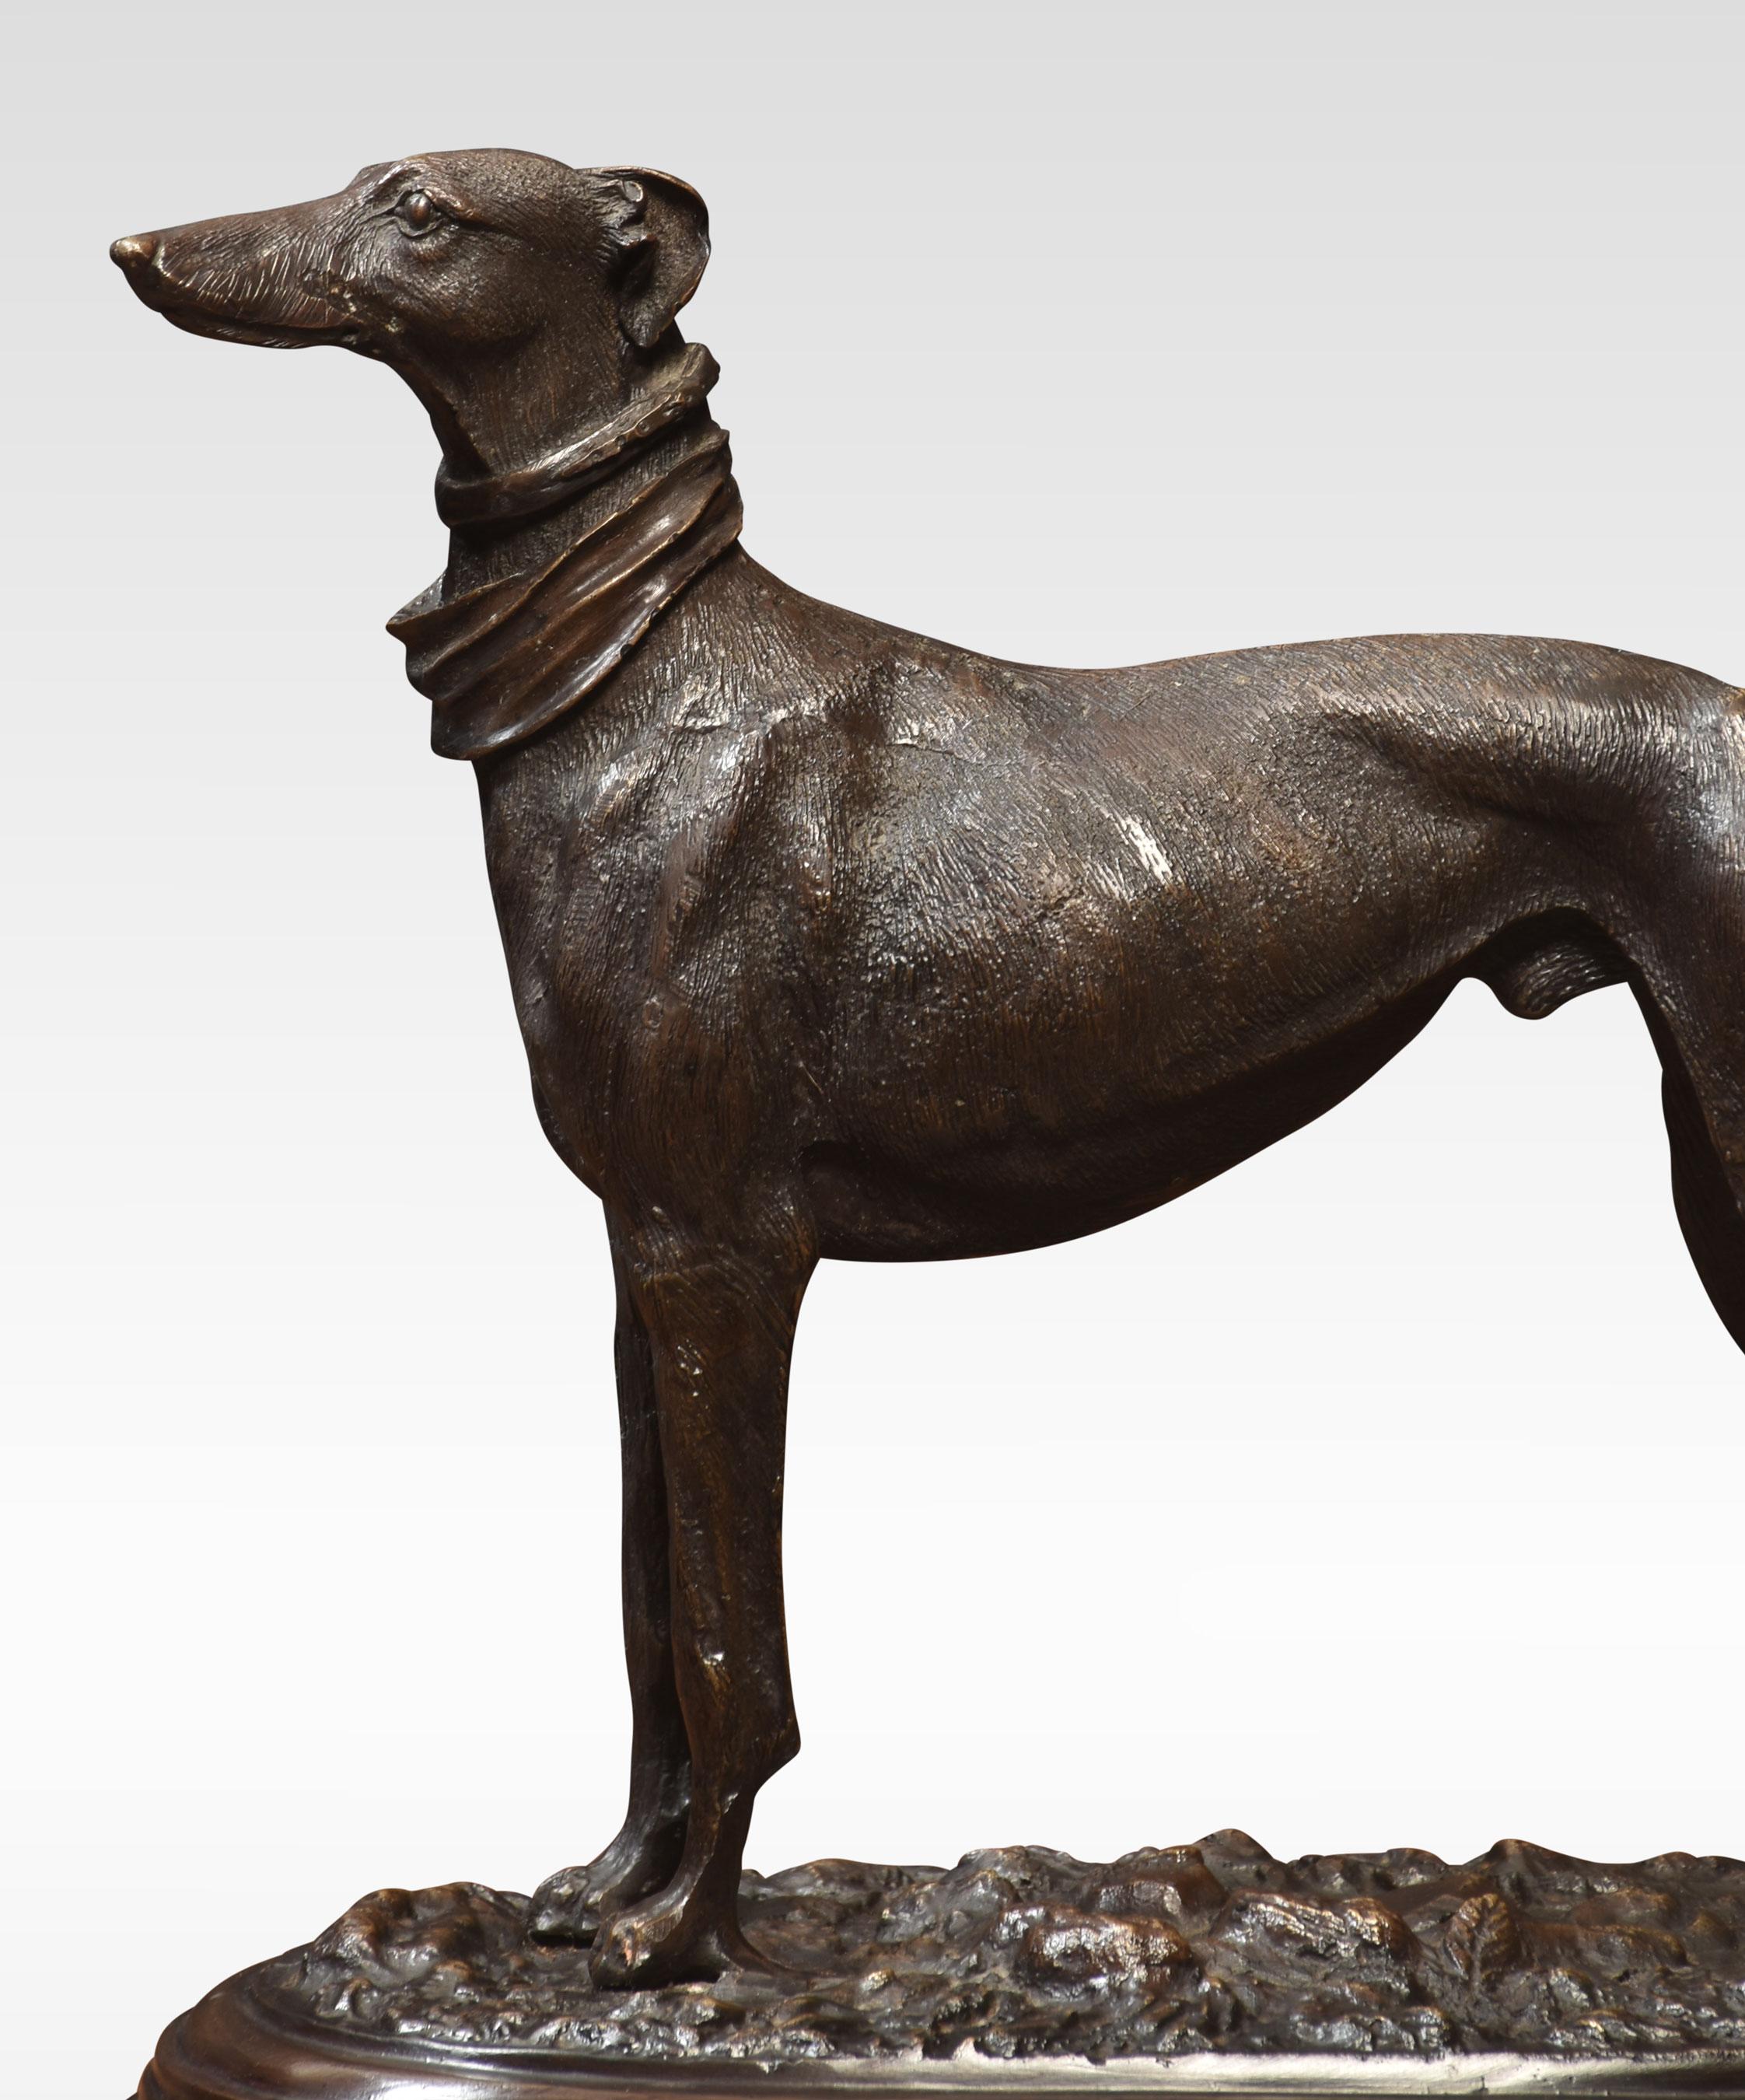 A bronze sculpture of a Greyhound raised up on a marble steped base.
Dimensions
Height 11.5 Inches
Length 12.5 Inches
width 7.5 Inches